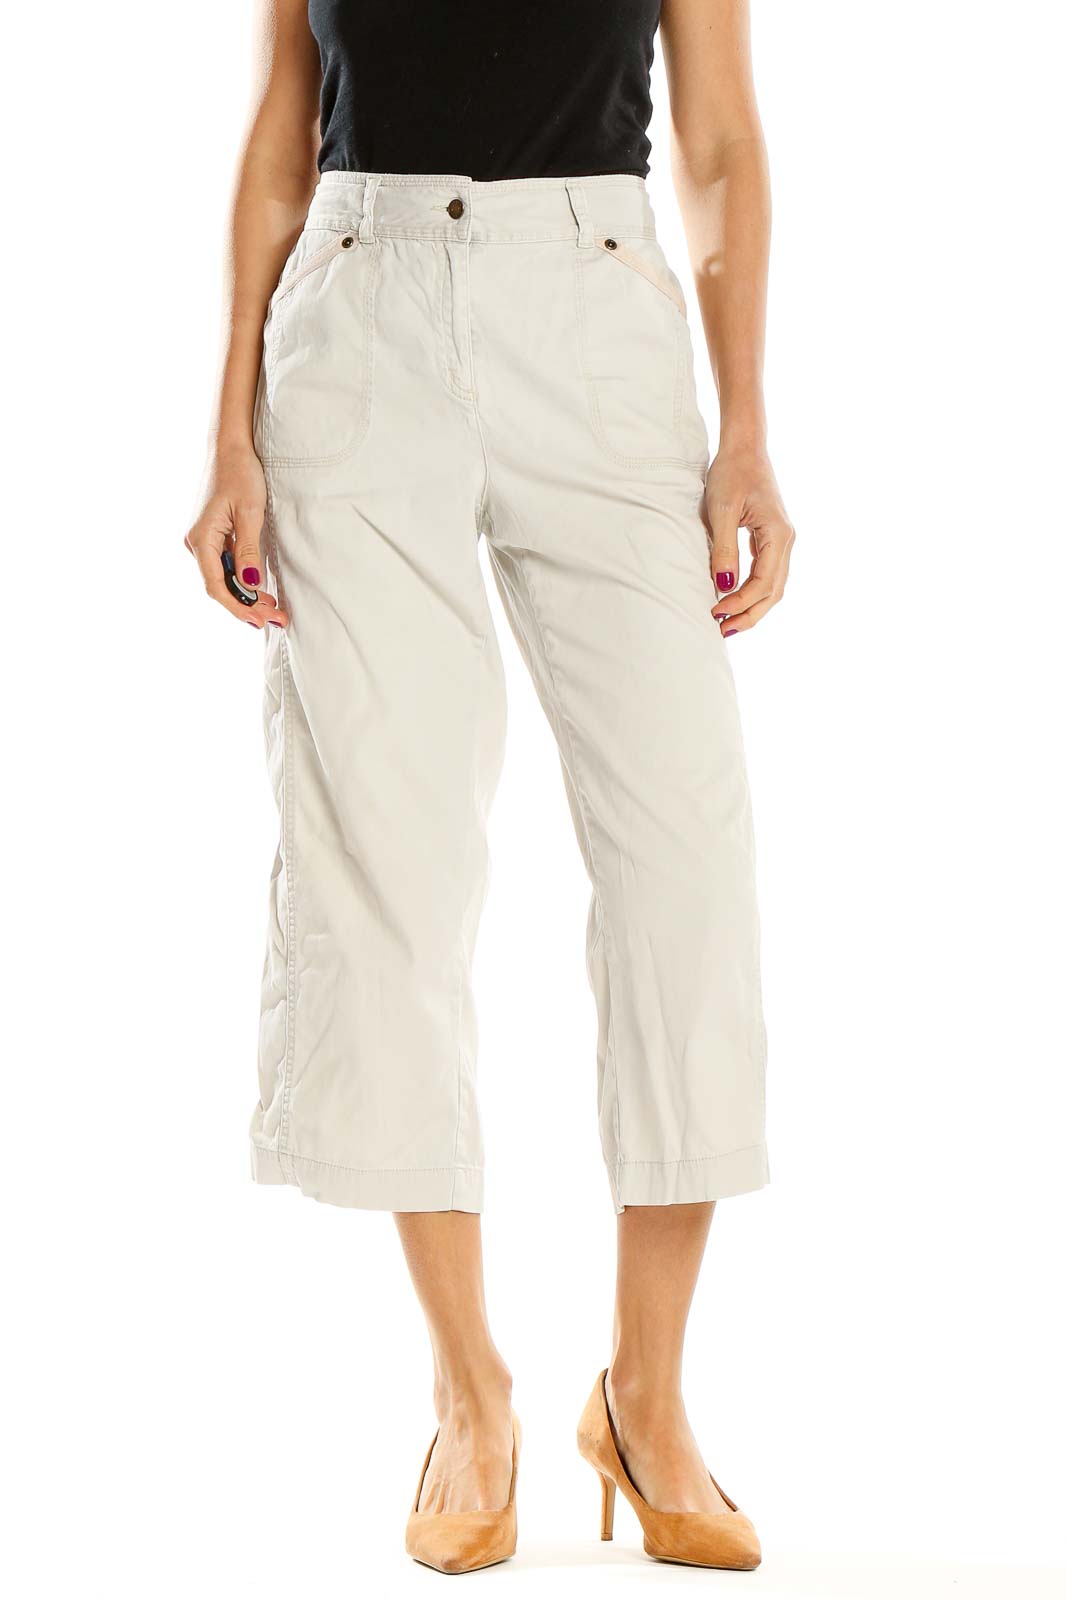 Gray Cropped Casual Cargos Pants Front